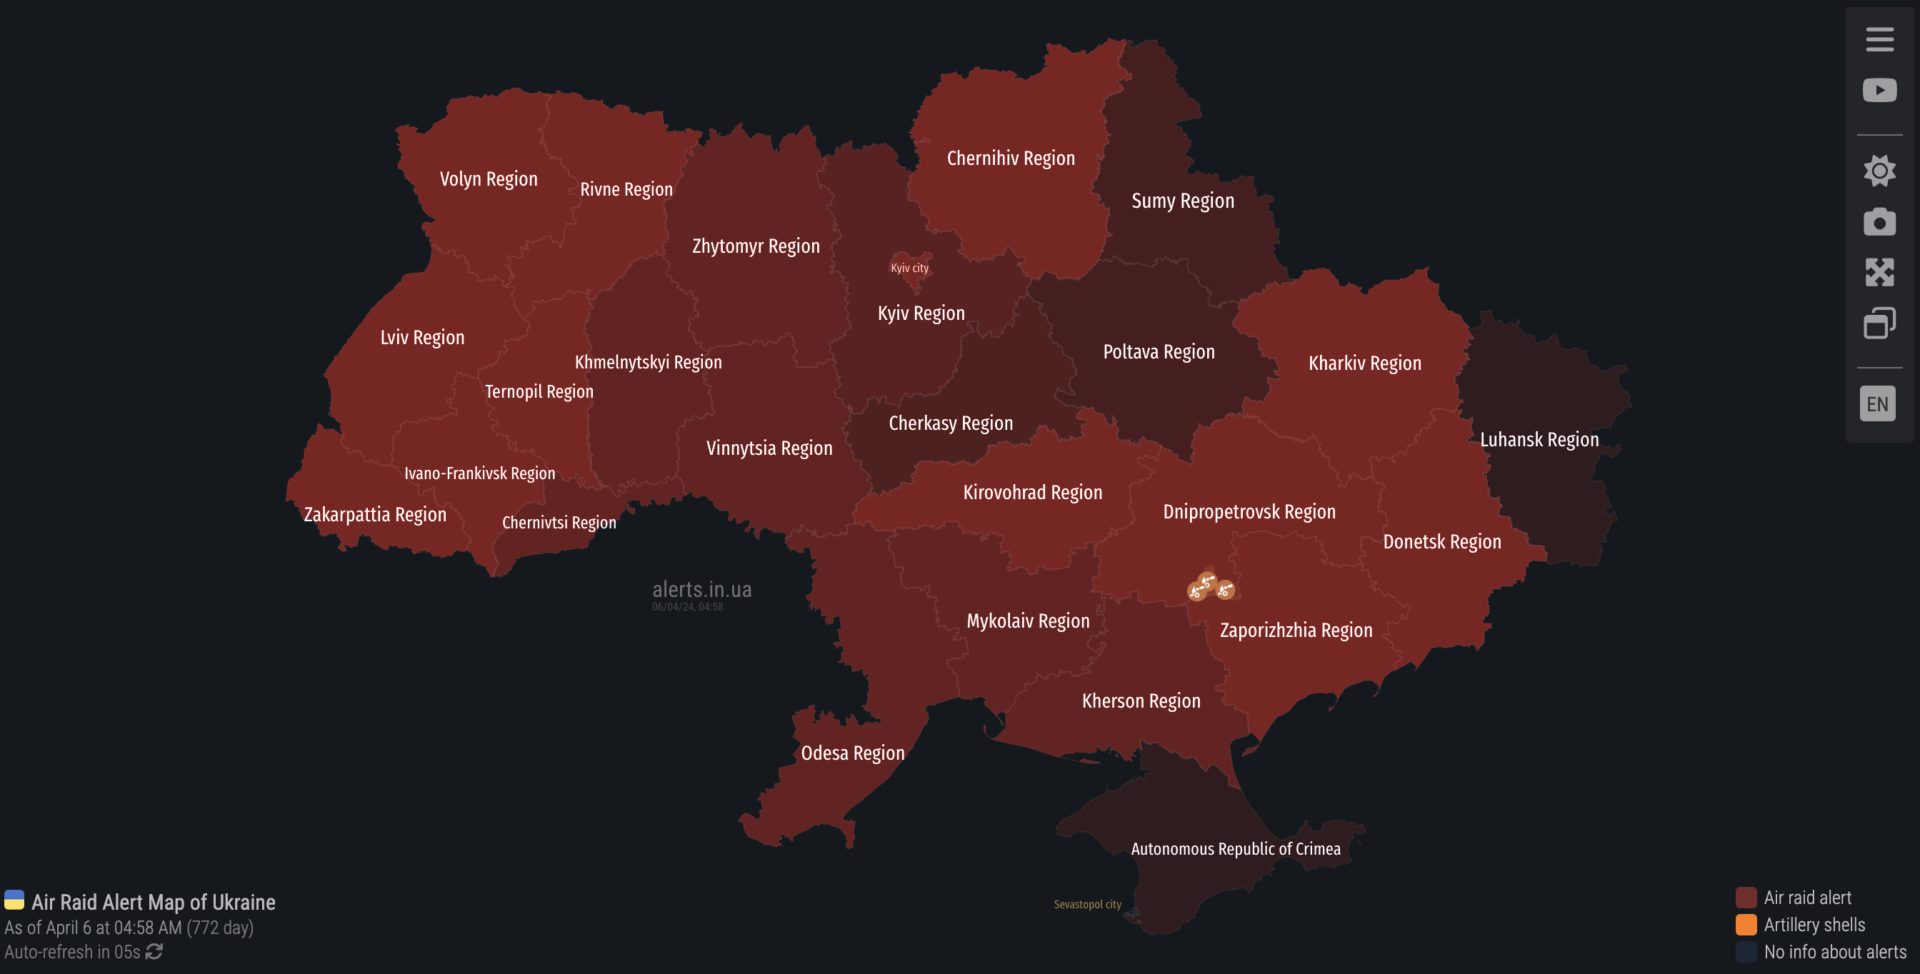 Screen grab of the air raid alert map for Ukraine. It is from 9:58 PM EDT and the entire country is under air raid alert. Every oblast/region is colored red or dark red.